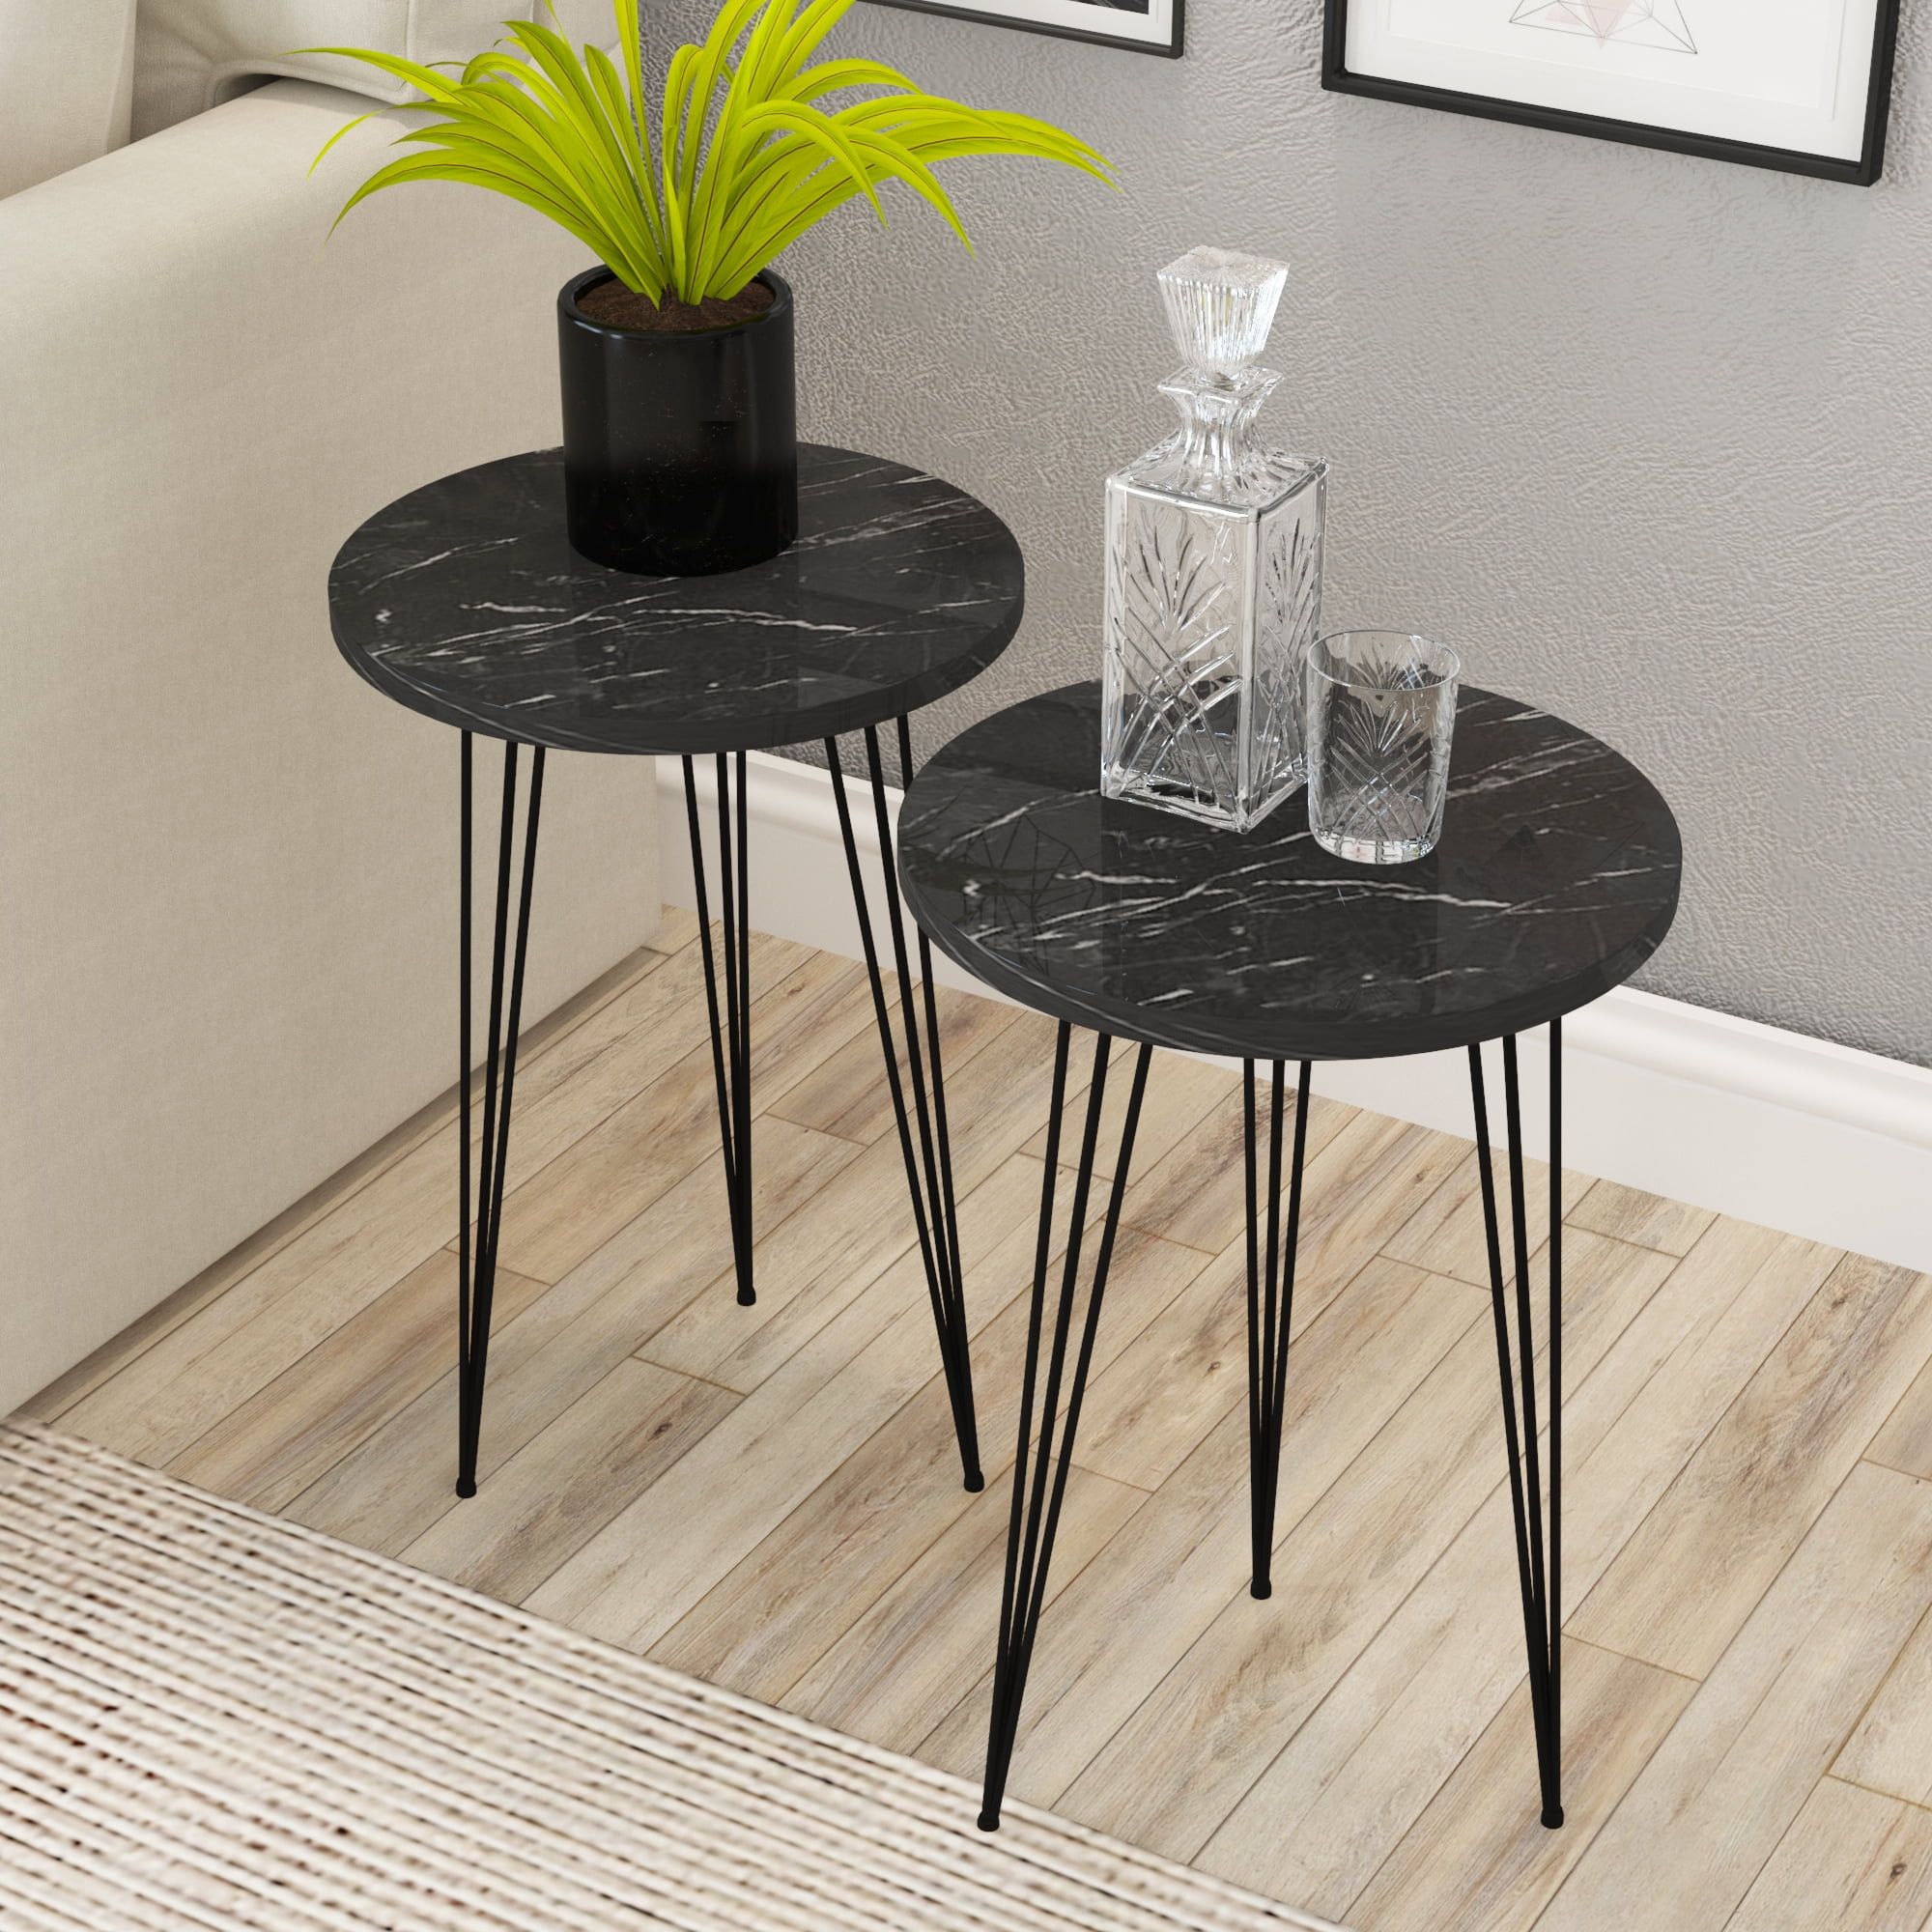 Pak Home Set Of 2 End Table – Round Wood Sofa Side Tables For Small Spaces,  Nightstand Bedside Table With Metal Legs For Bedroom, Living Room, Office,  Balcony (Black High Gloss) – Walmart Pertaining To Metal Side Tables For Living Spaces (View 3 of 15)